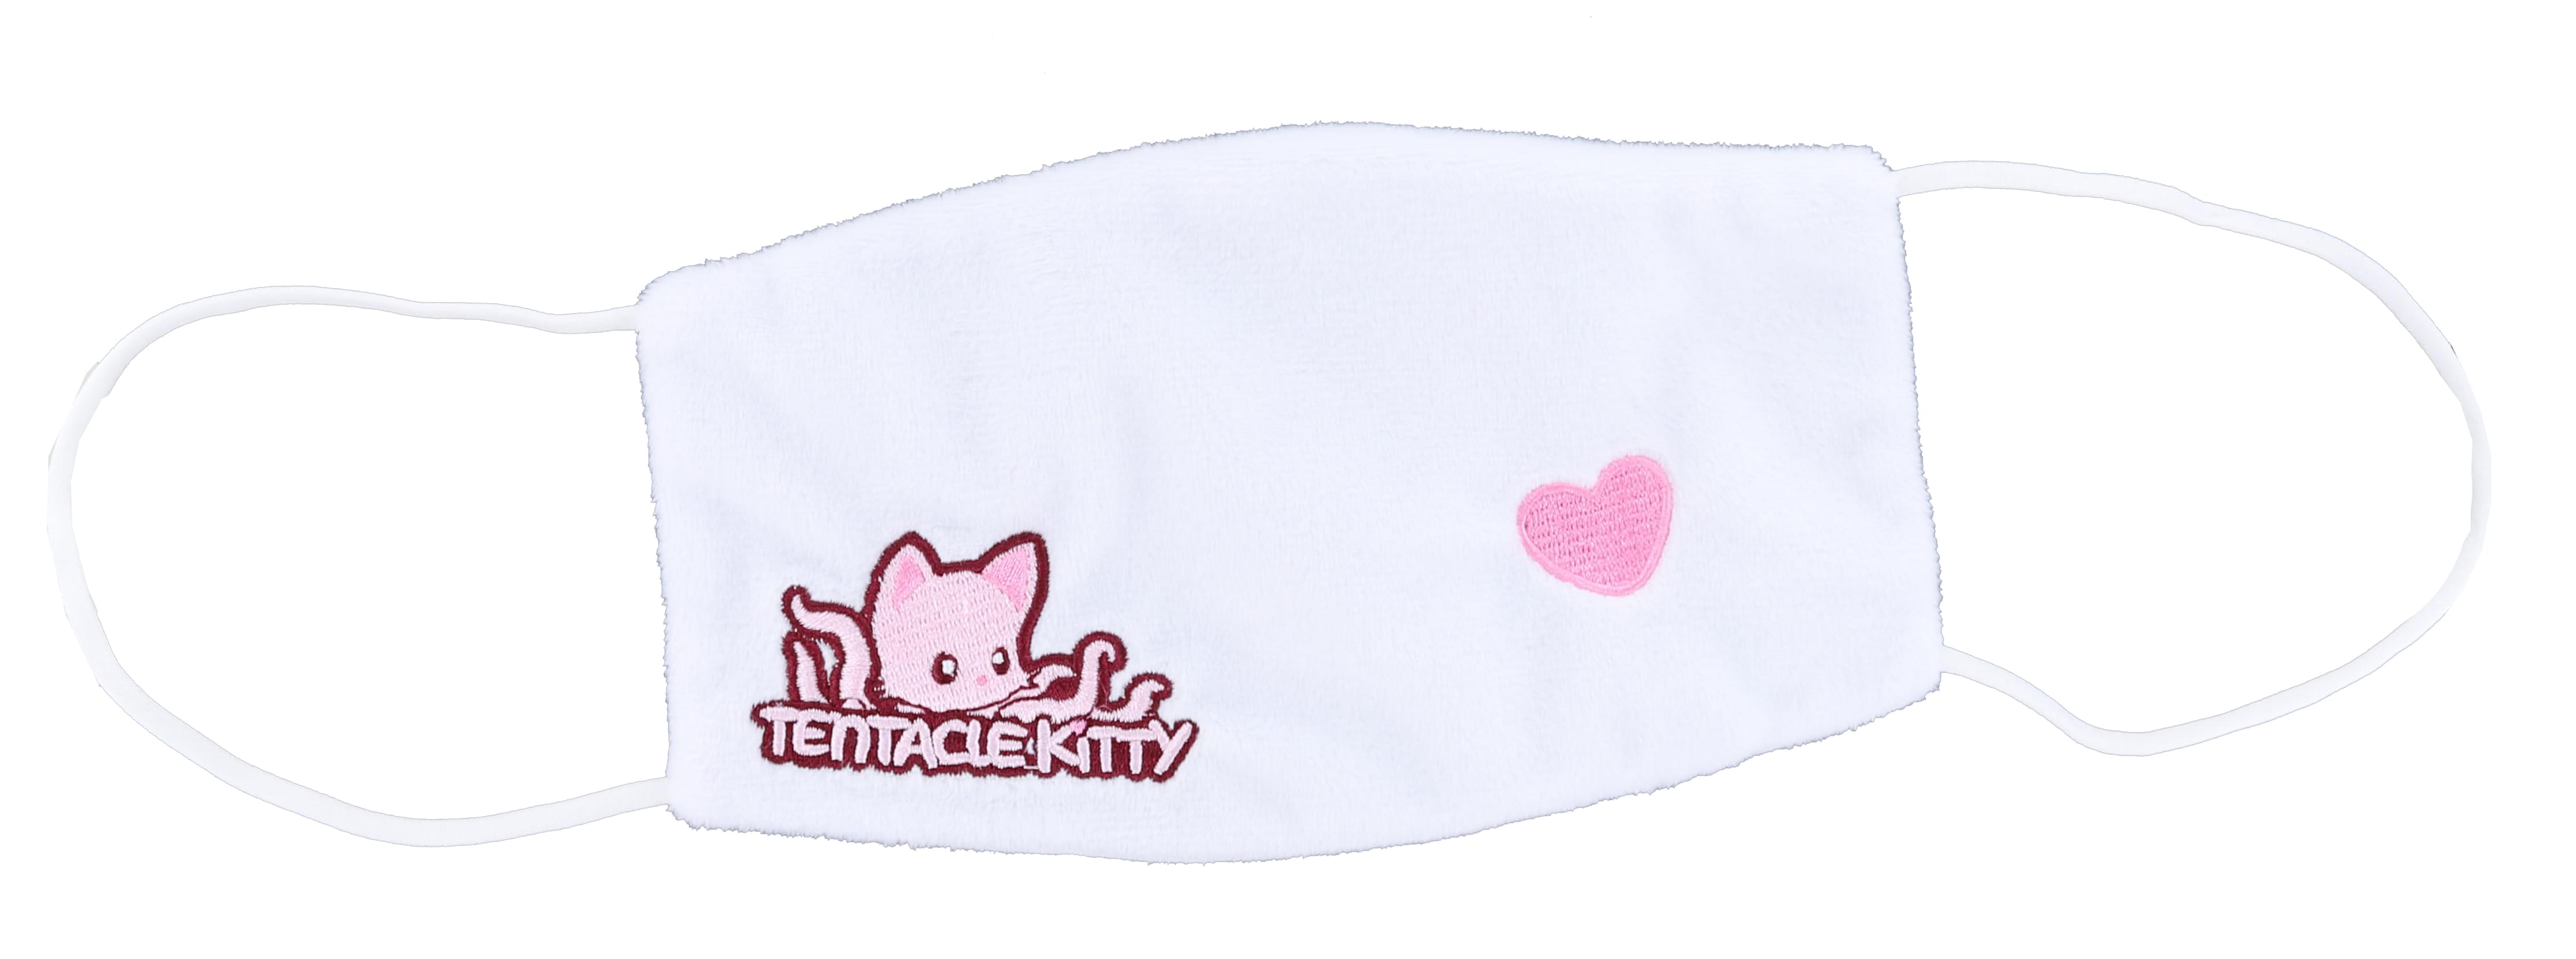 Tentacle Kitty Childrens Cotton Face Mask , White